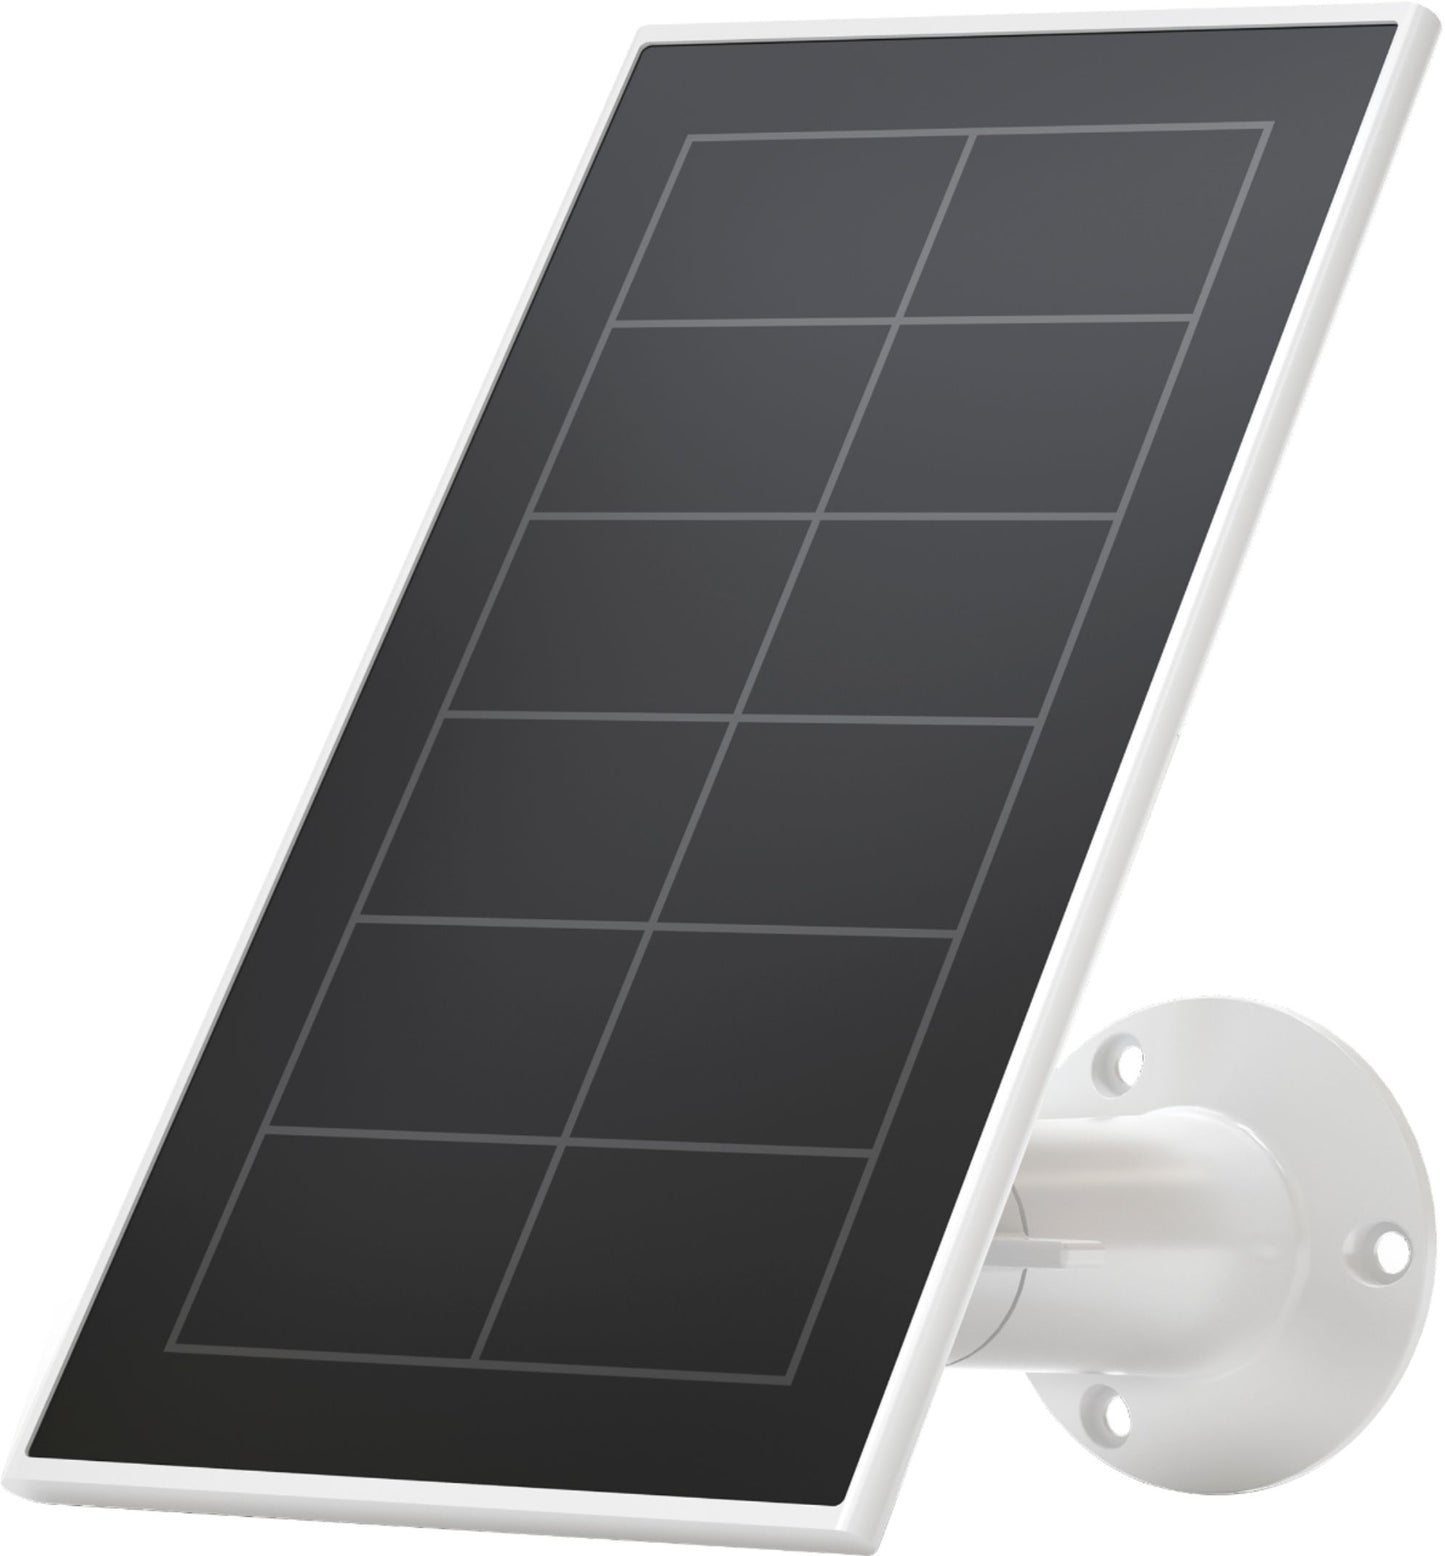 solar-panel-charger-vma5600-20000s-white-4